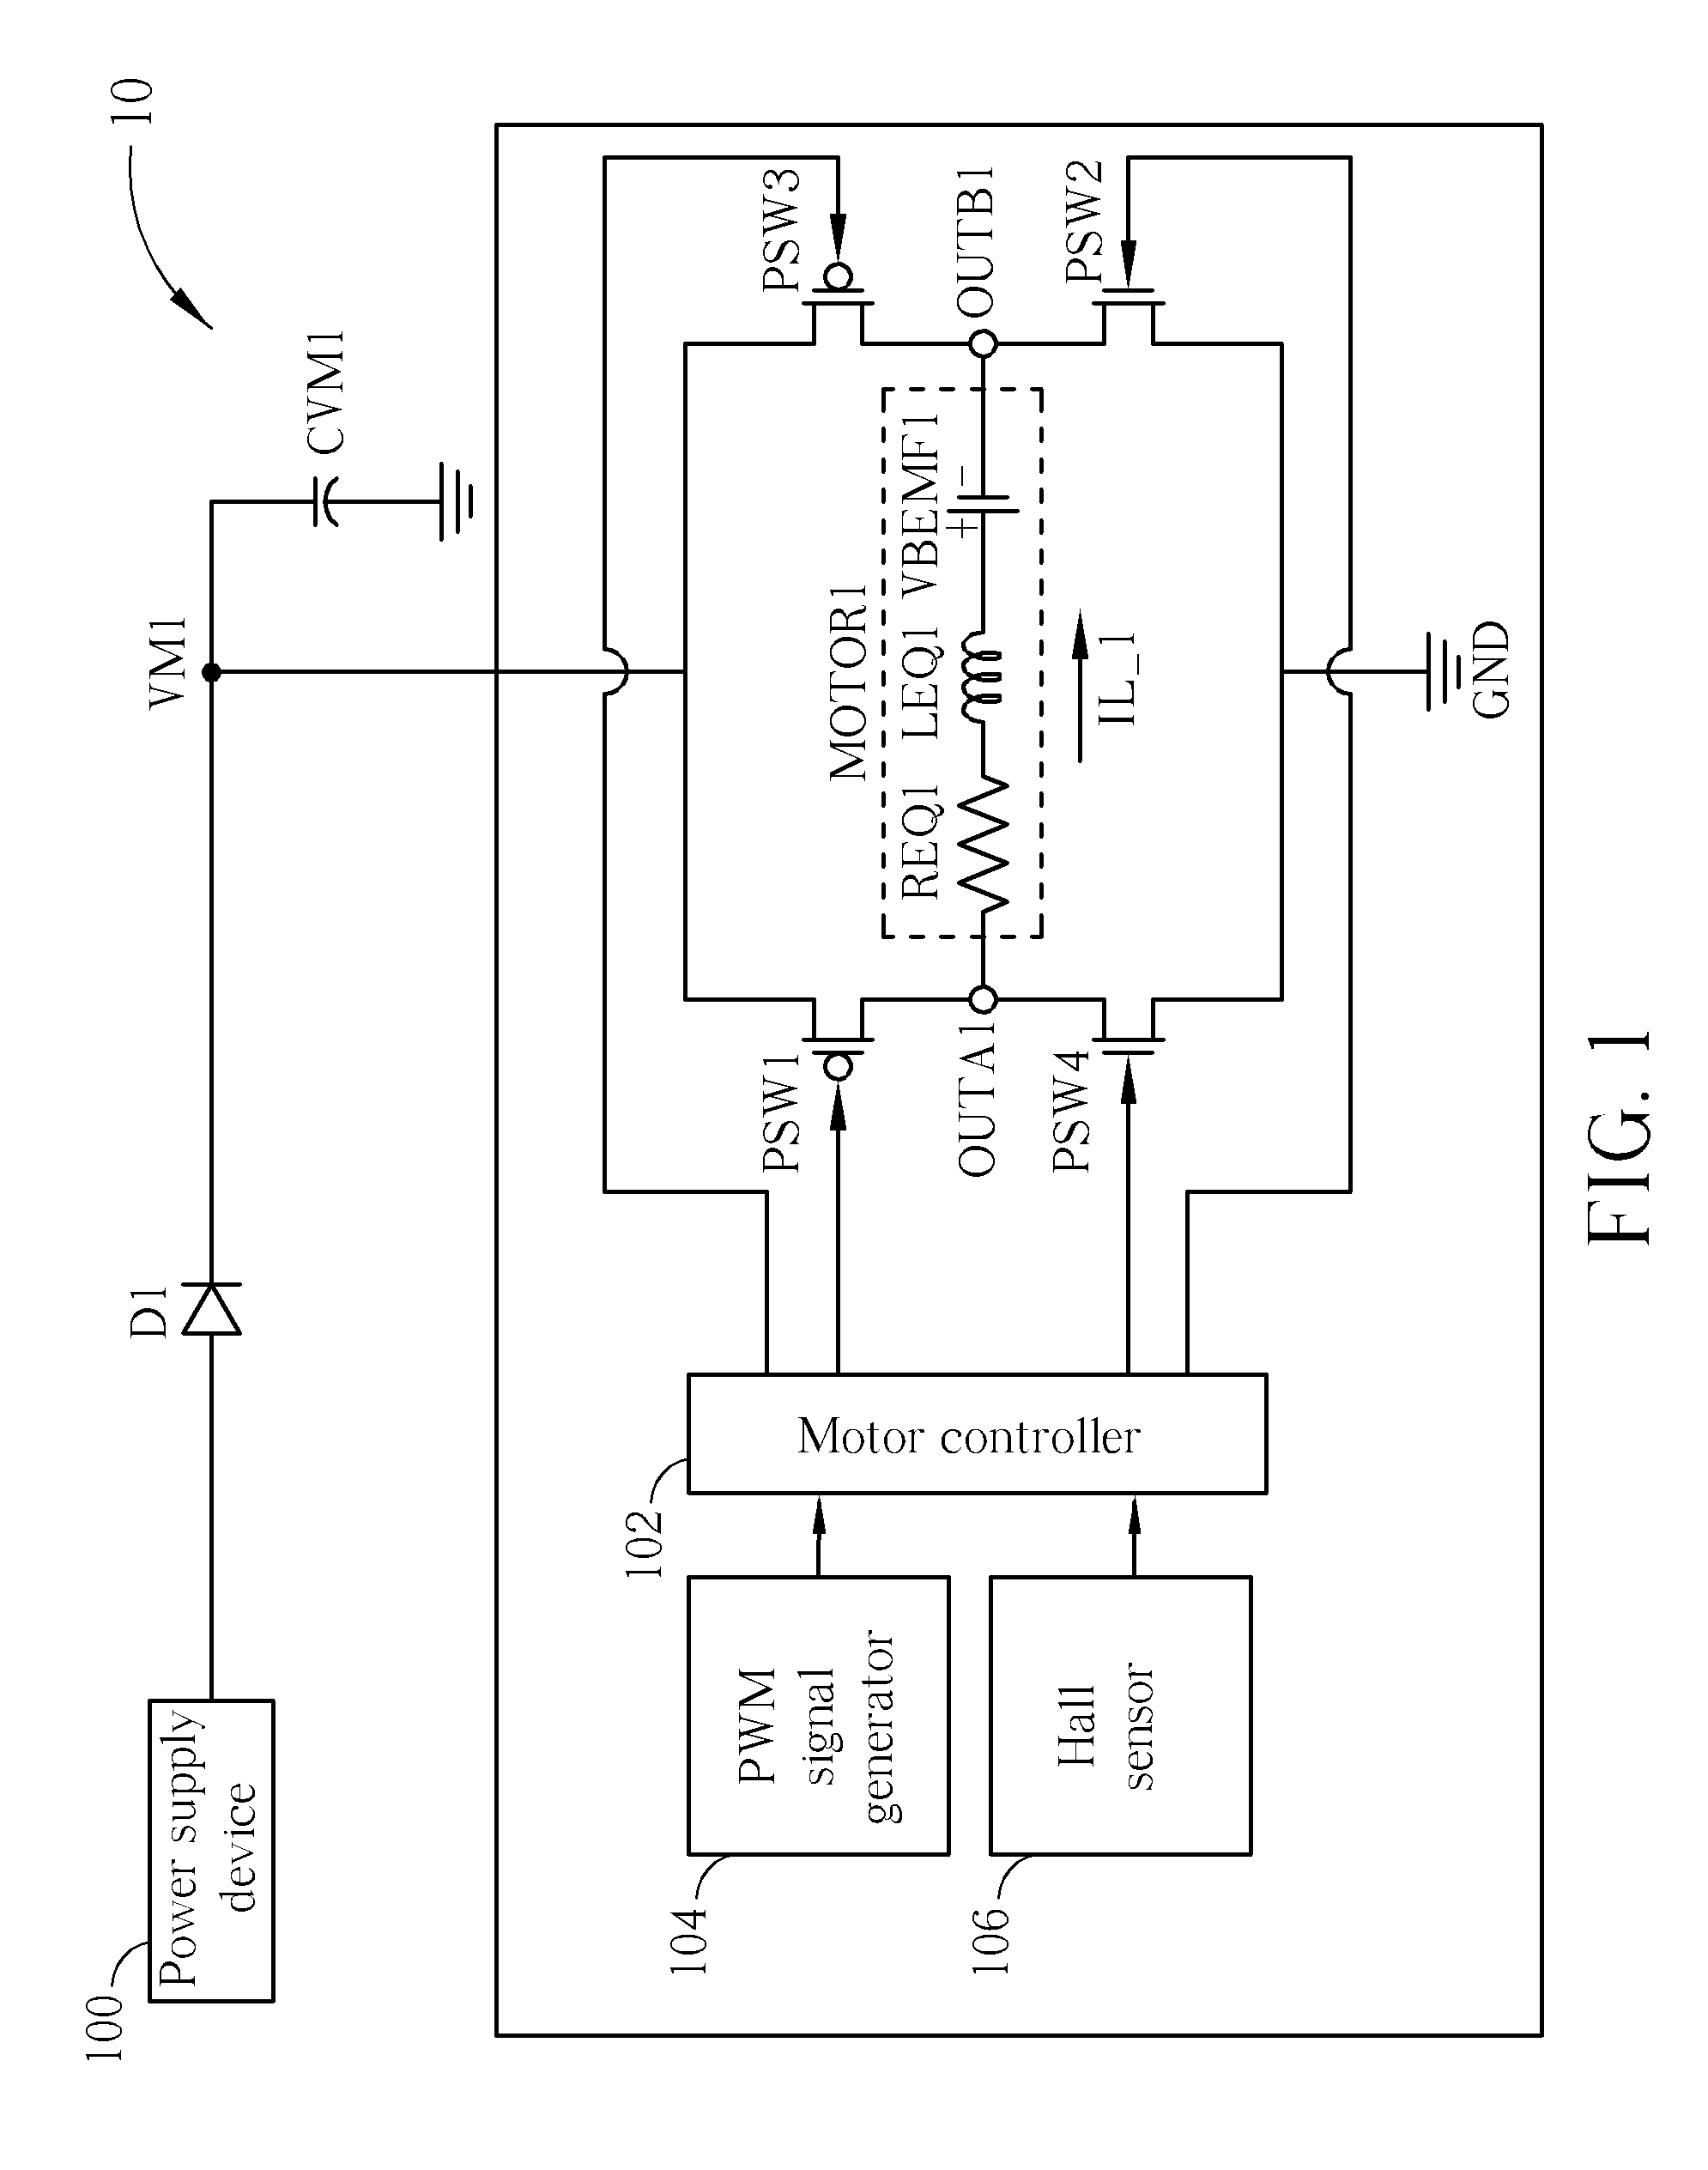 Method of driving DC motor and related circuit for avoiding reverse current